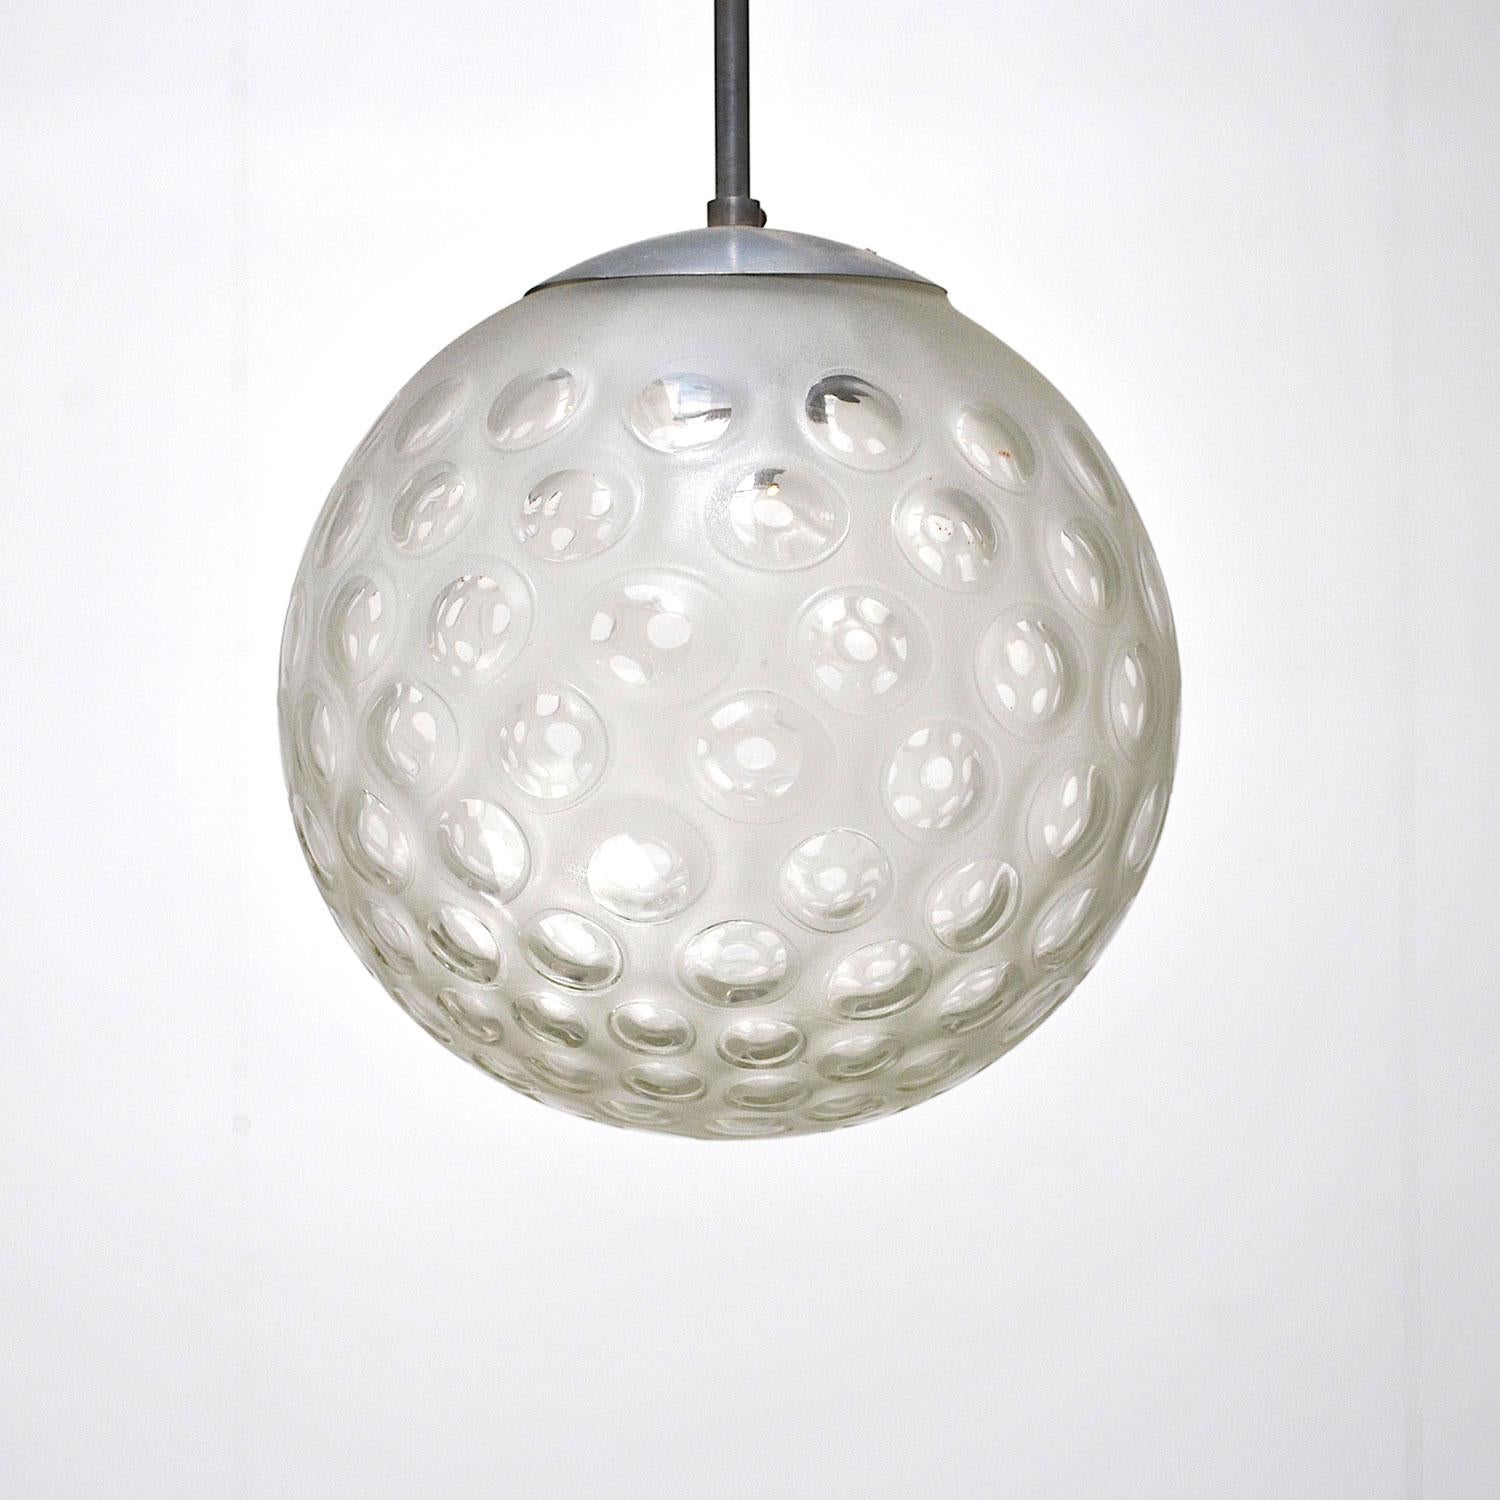 Italian midcentury chandelier in worked glass from the 1960s.